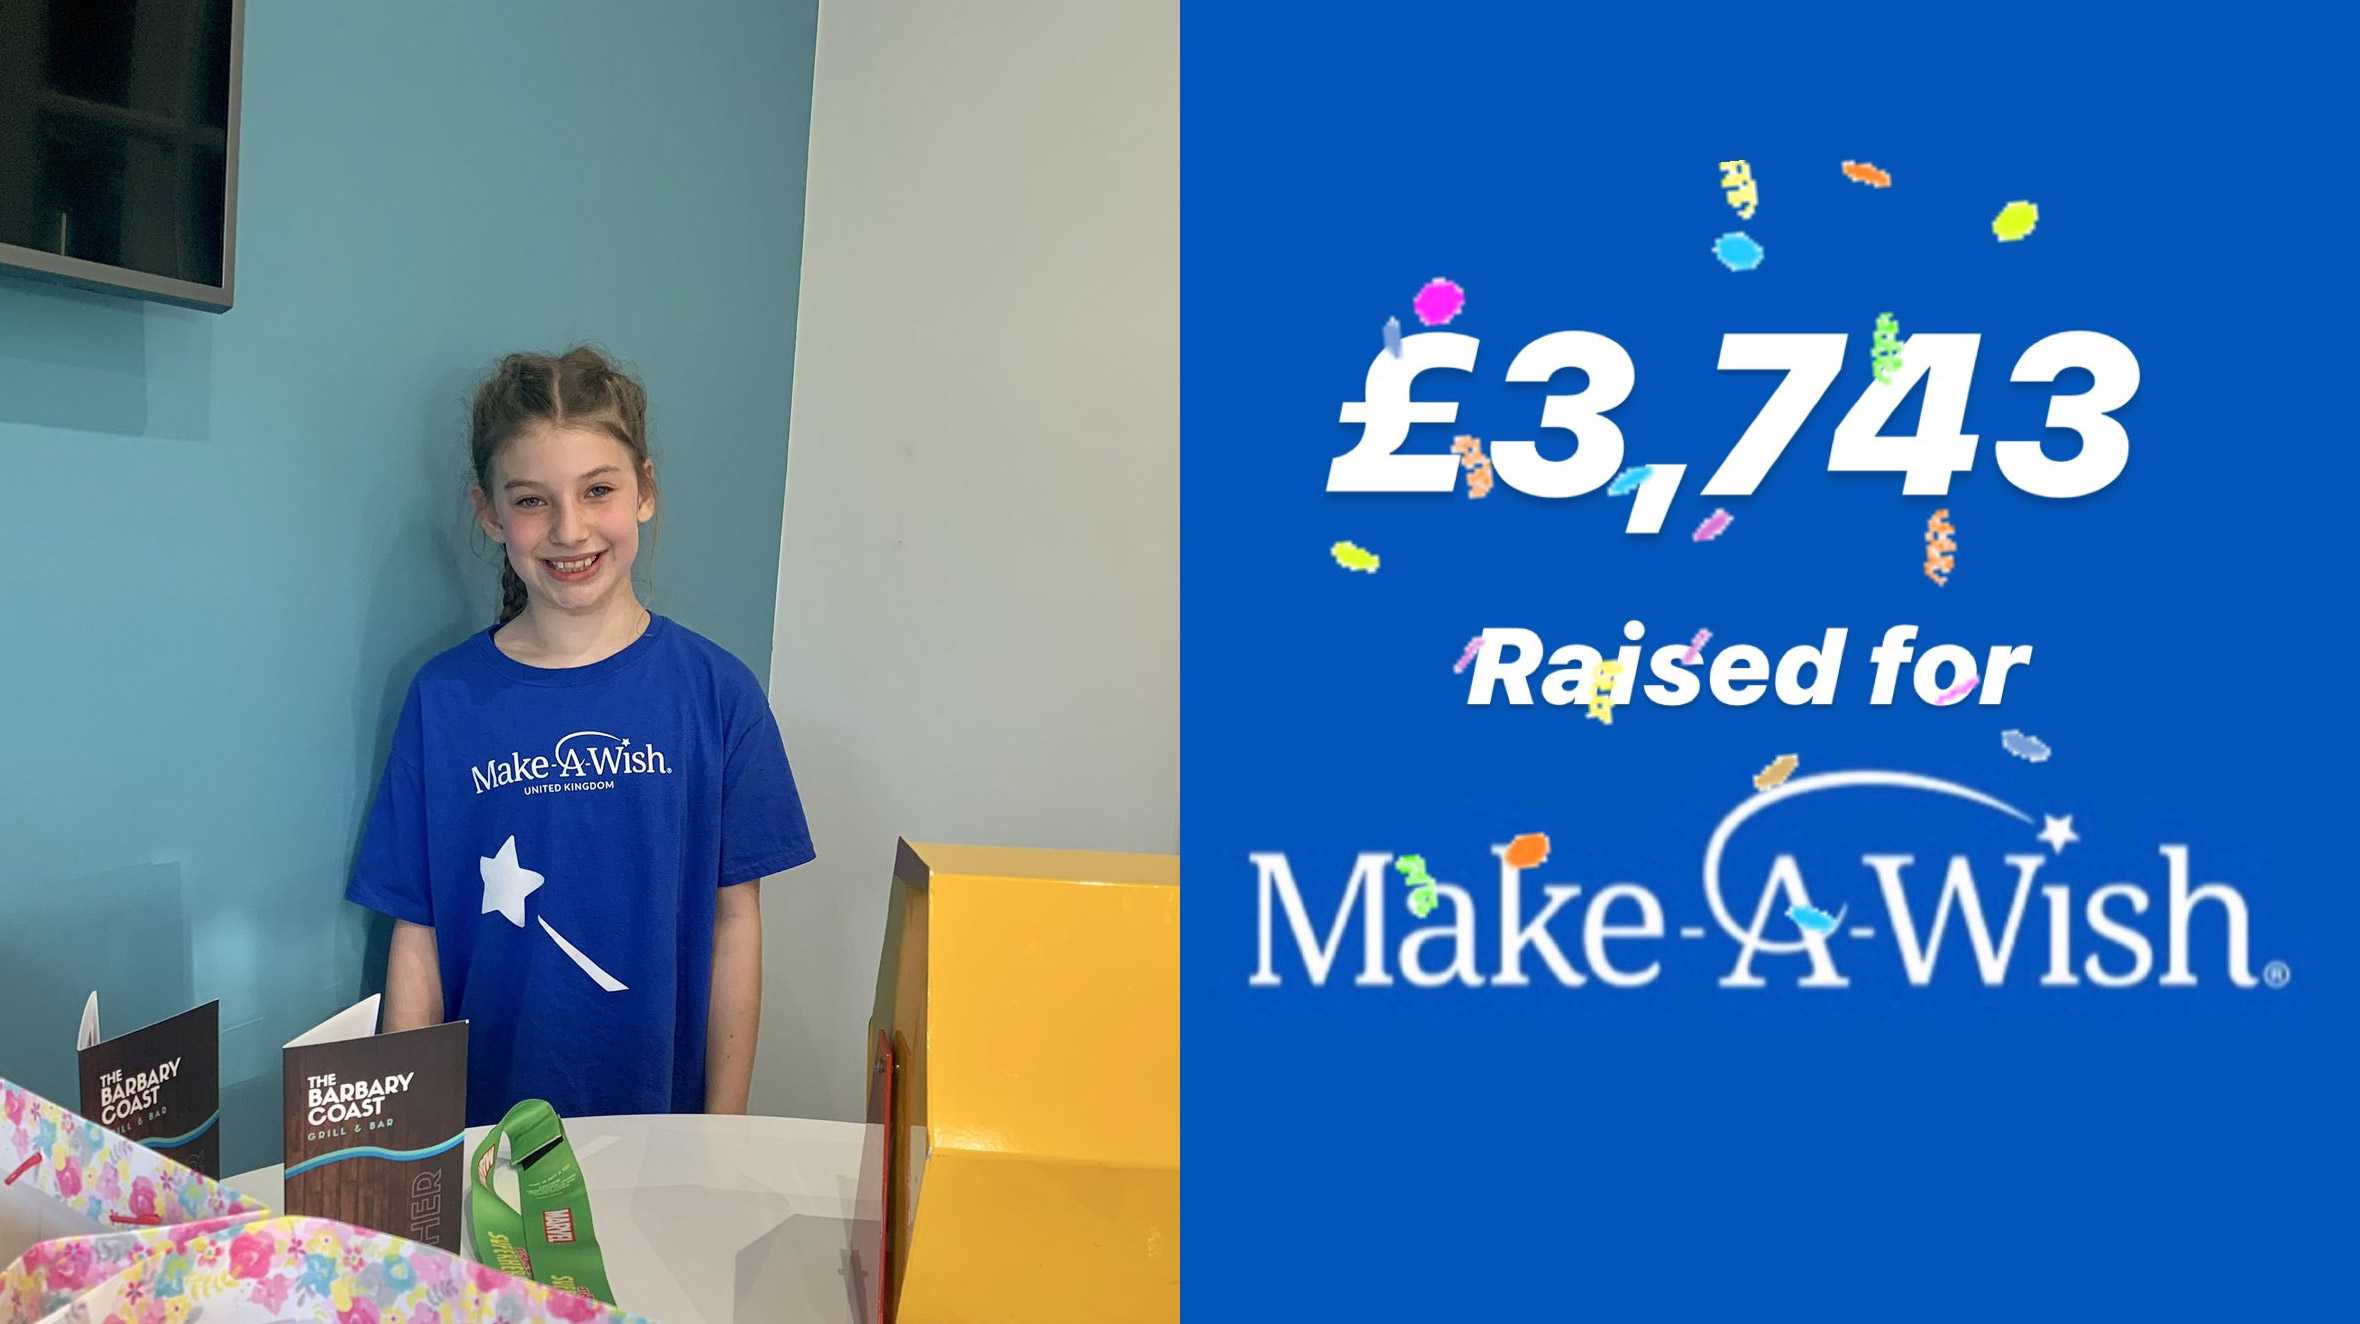 Wish child Chloe, wearing her Make-A-Wish t-shirt and displaying the total raised by her fundraising of £3,743.